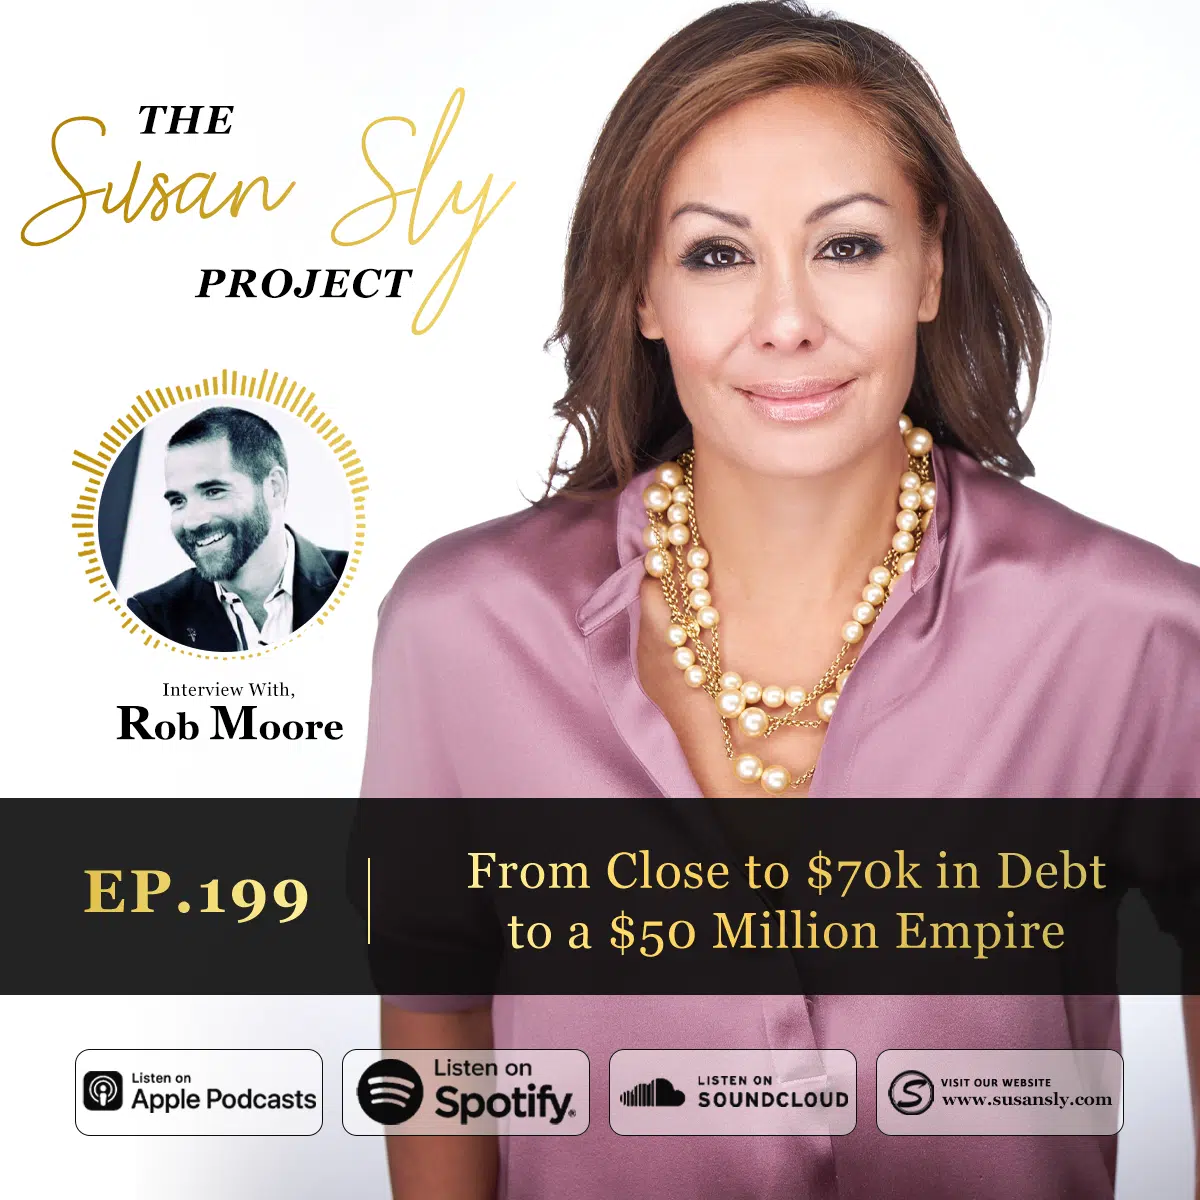 Susan Sly Podcast Interview With Rob Moore